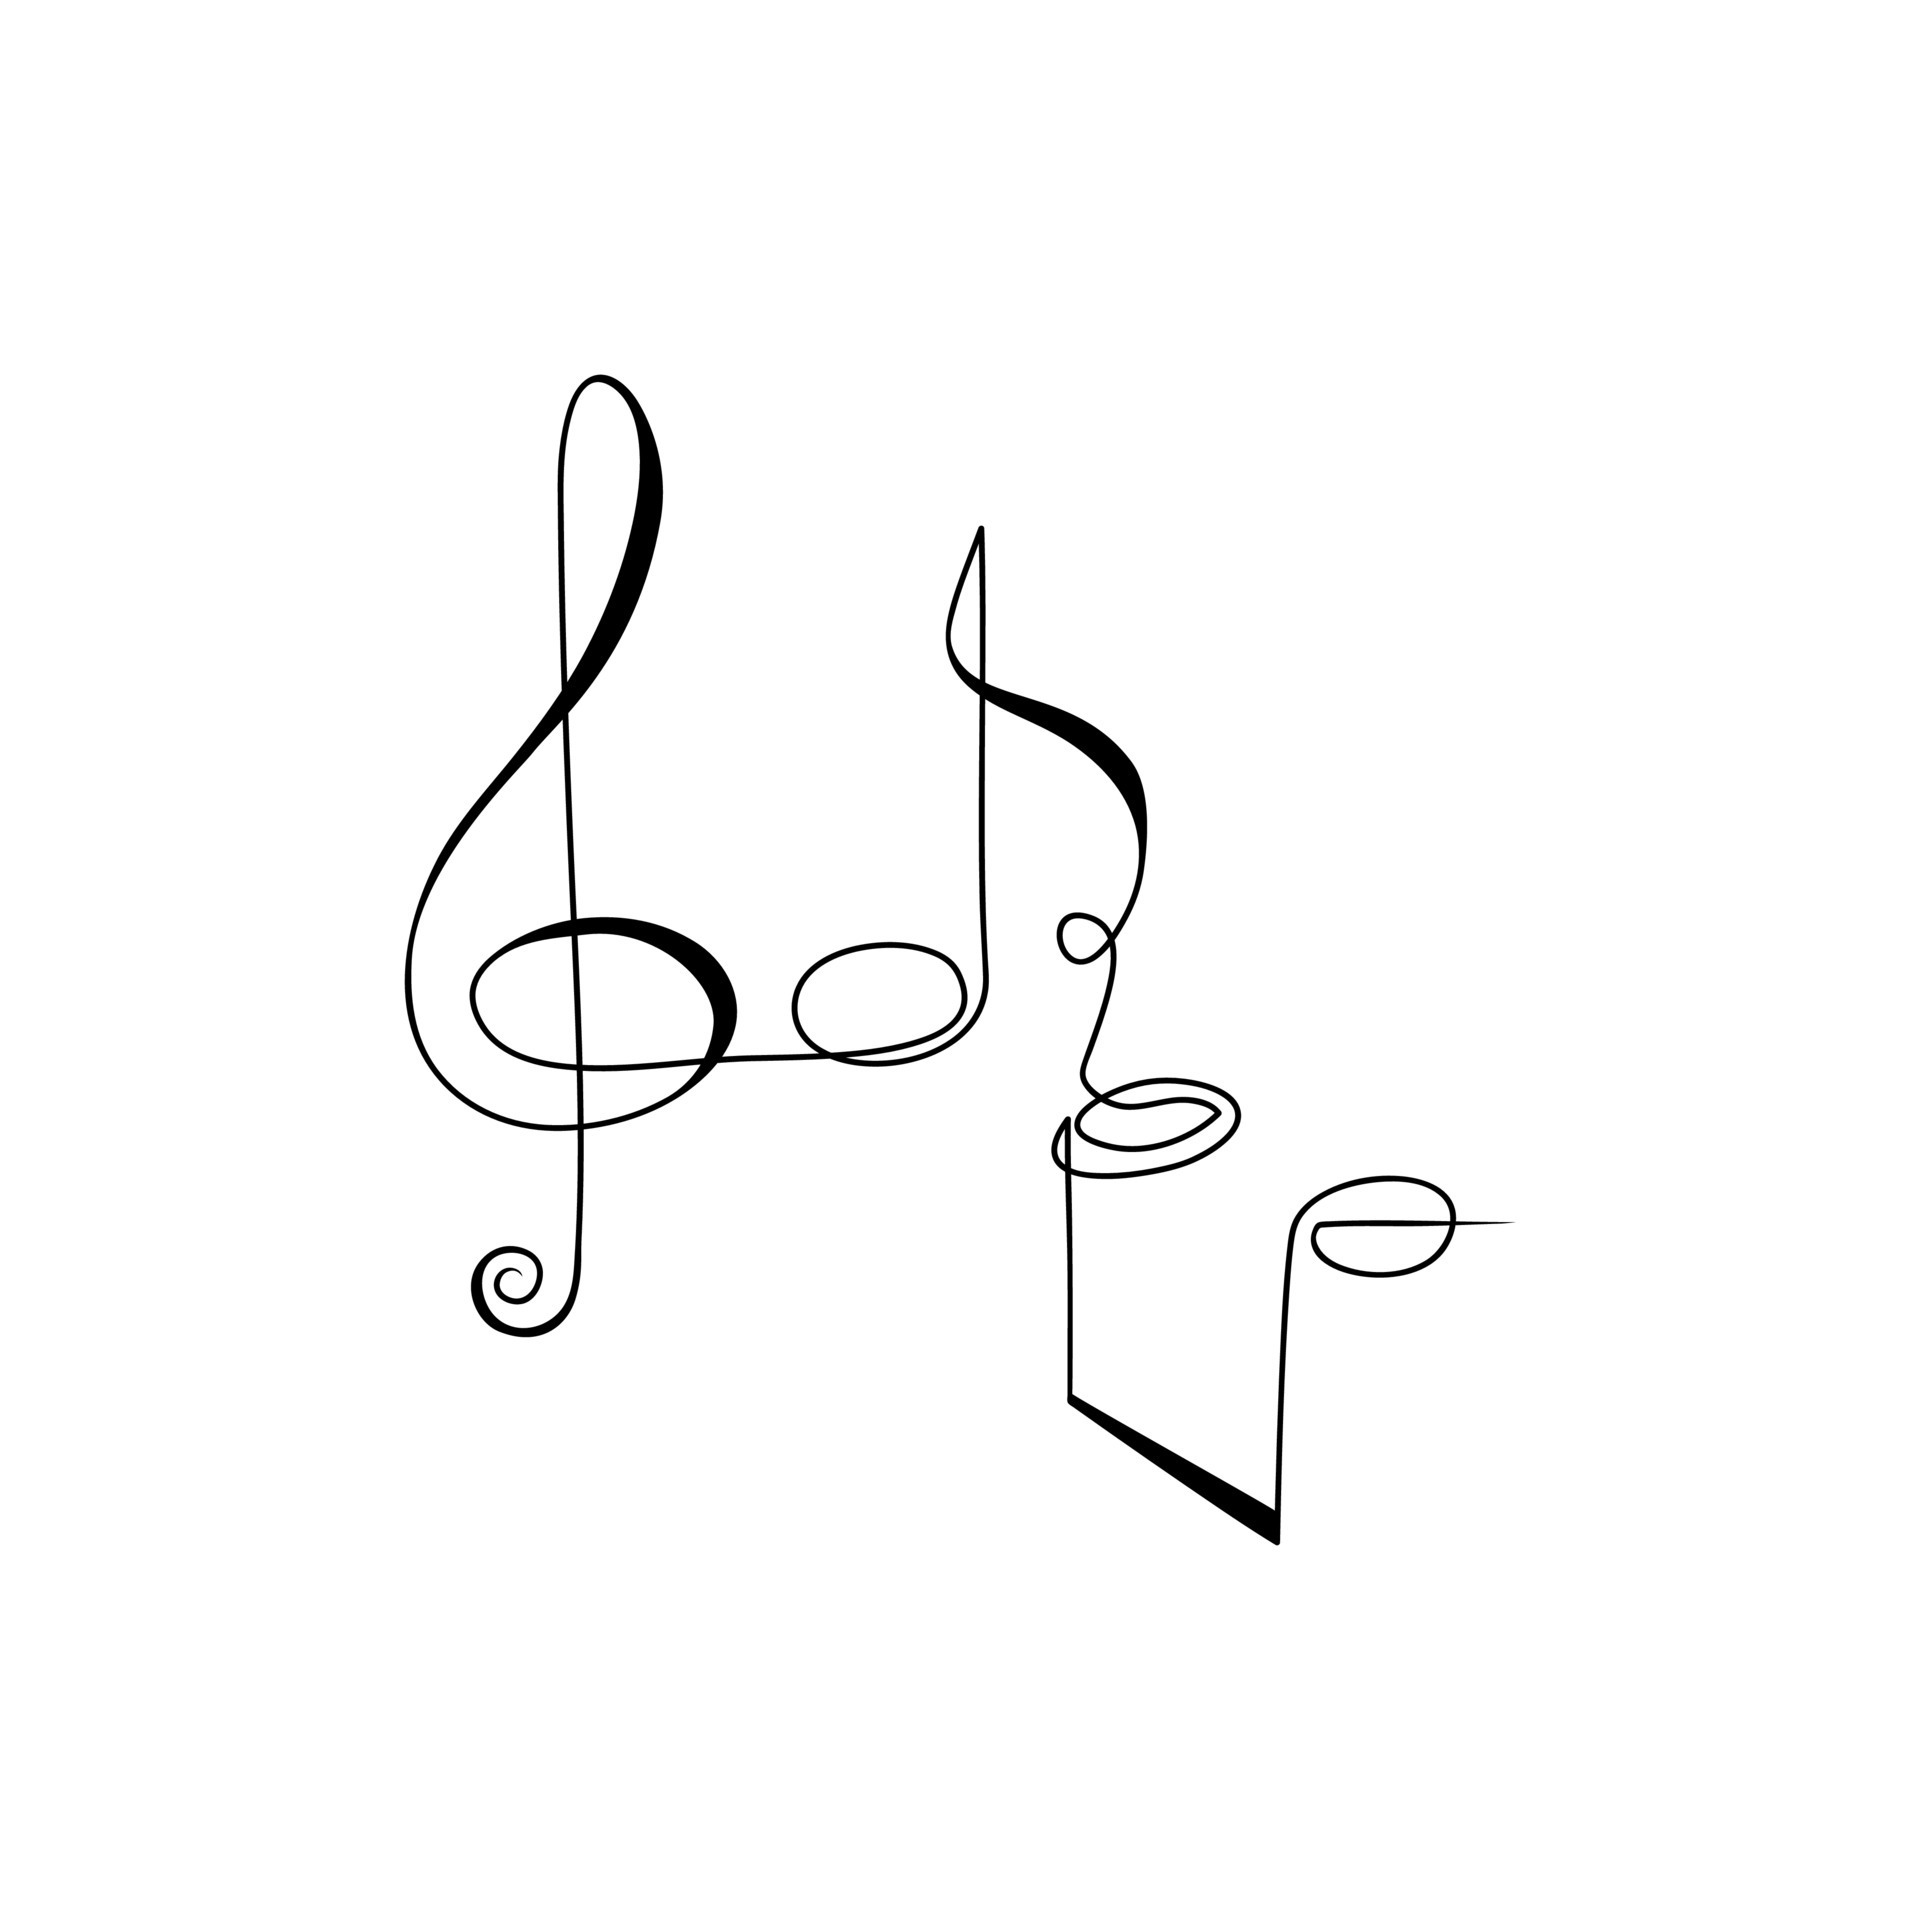 1686 Music Notes Tattoo Images Stock Photos  Vectors  Shutterstock